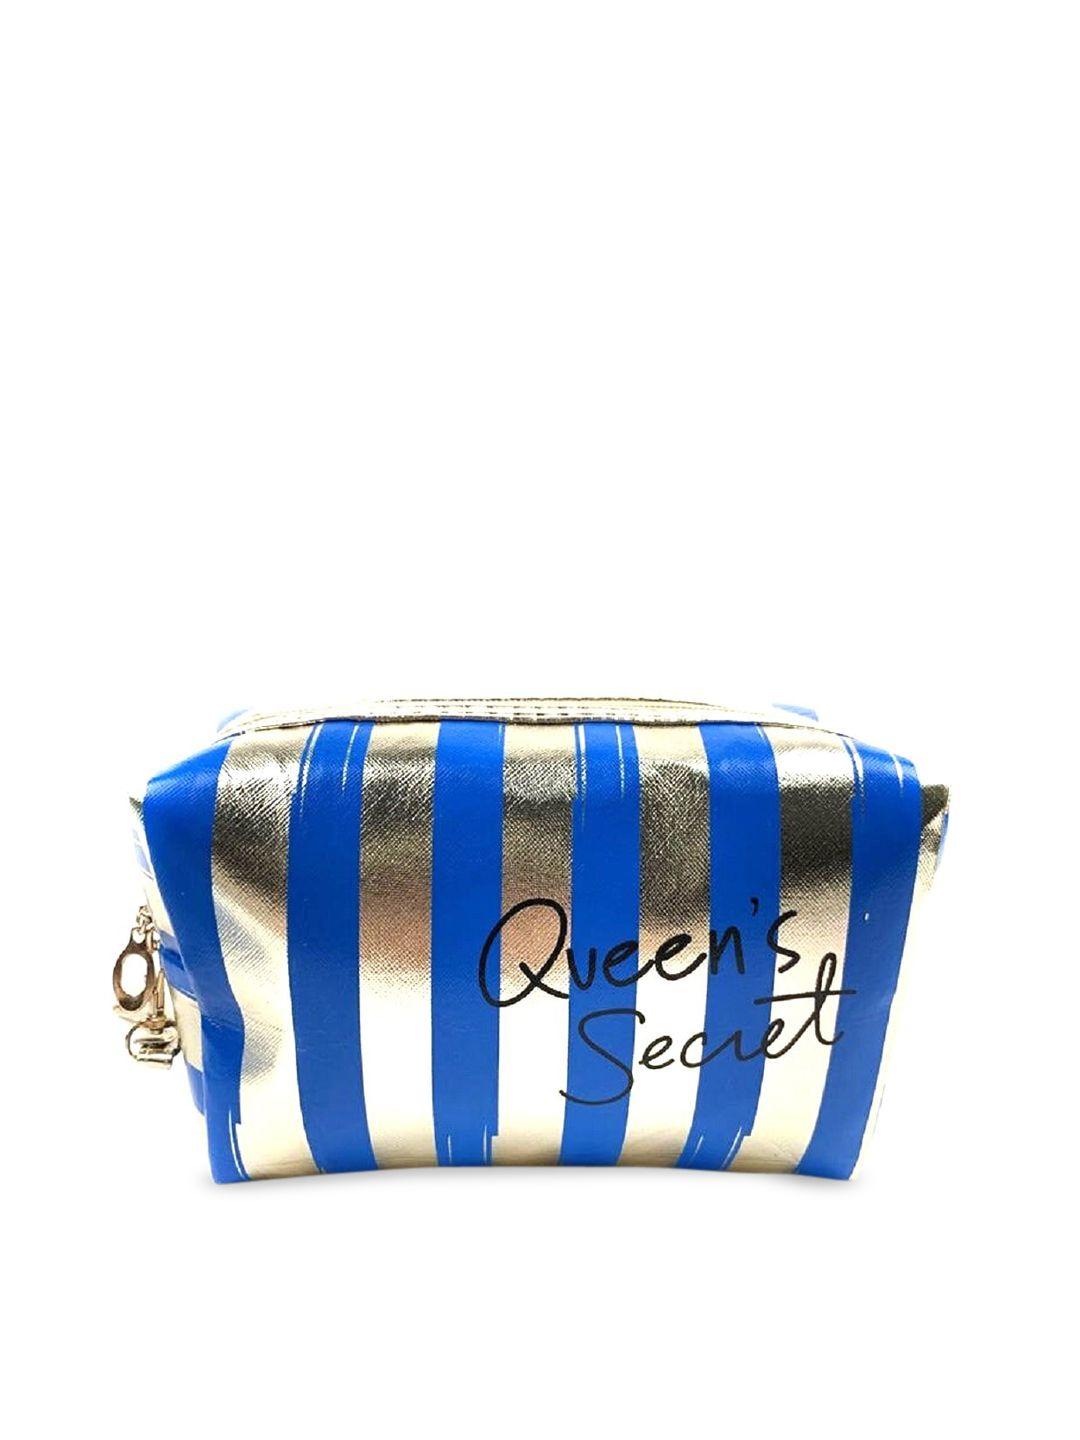 awestuffs blue & gold-toned striped cosmetic pouch